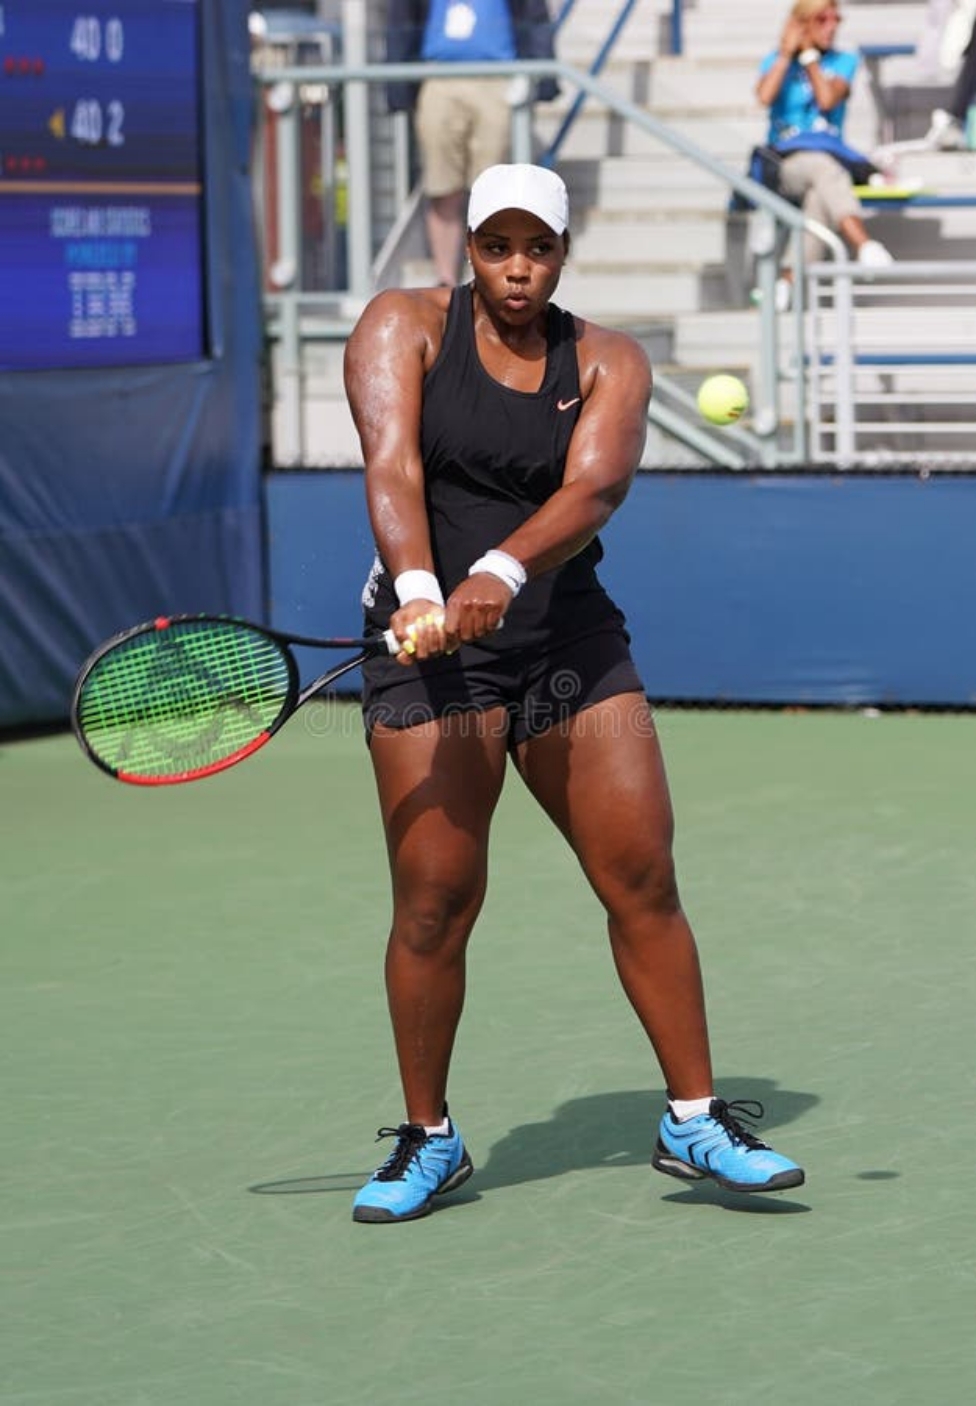 new-york-august-professional-tennis-player-taylor-townsend-united-states-action-her-us-open-fi...jpg